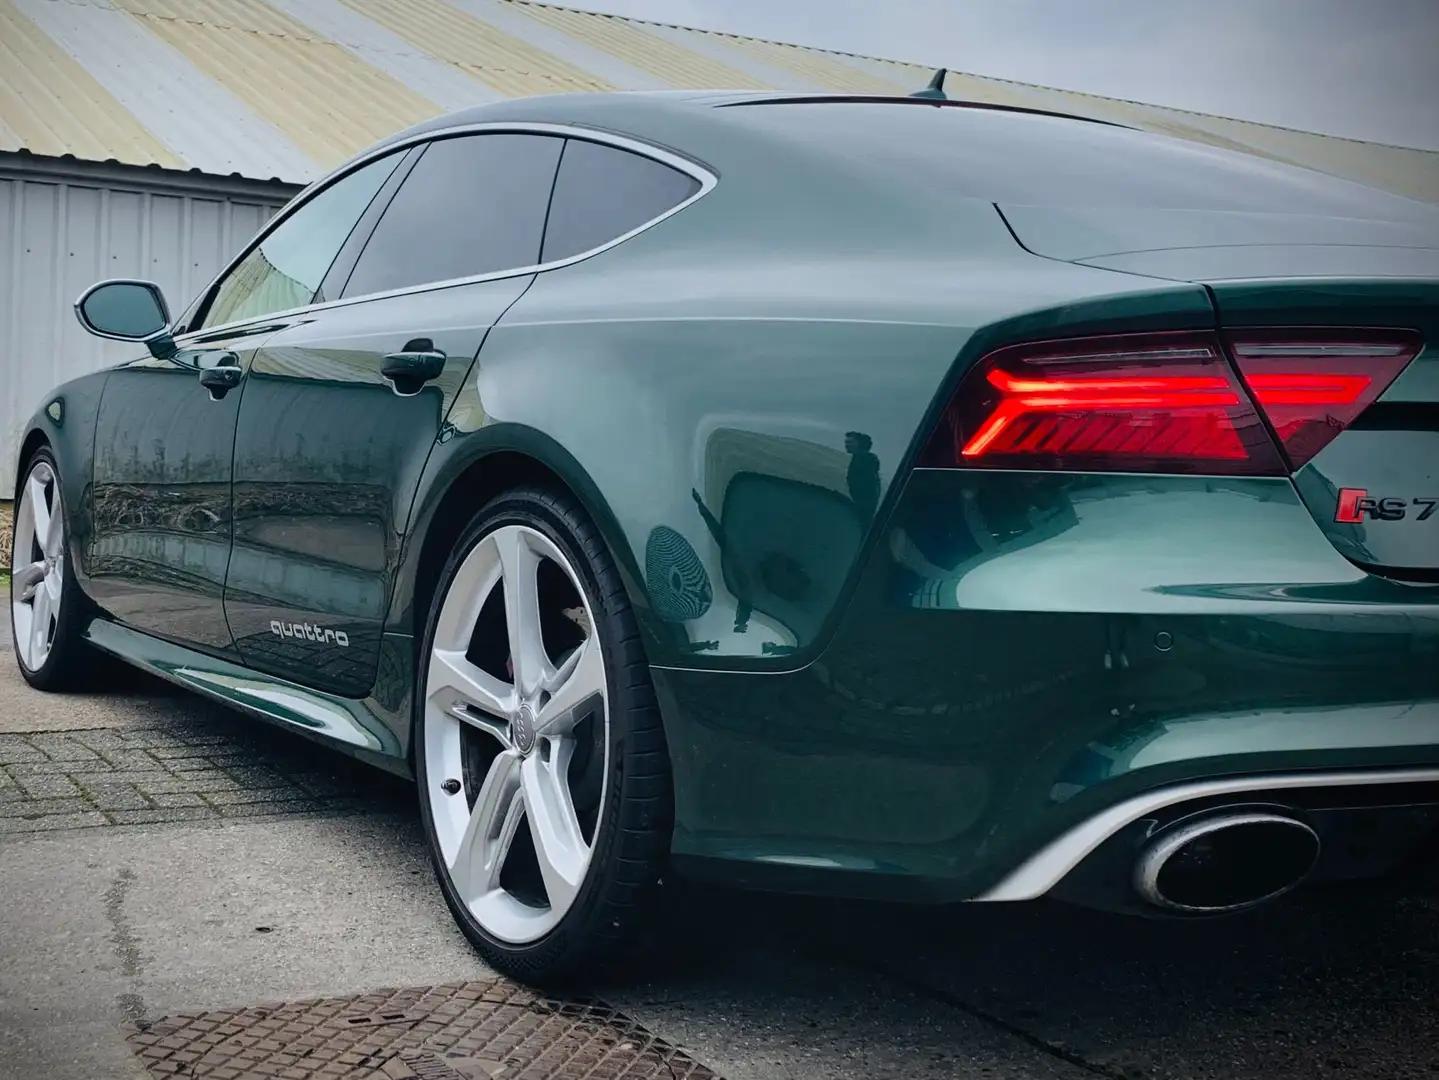 Audi RS7 Verdant Green - Audi Exclusive - from collector Green - 2